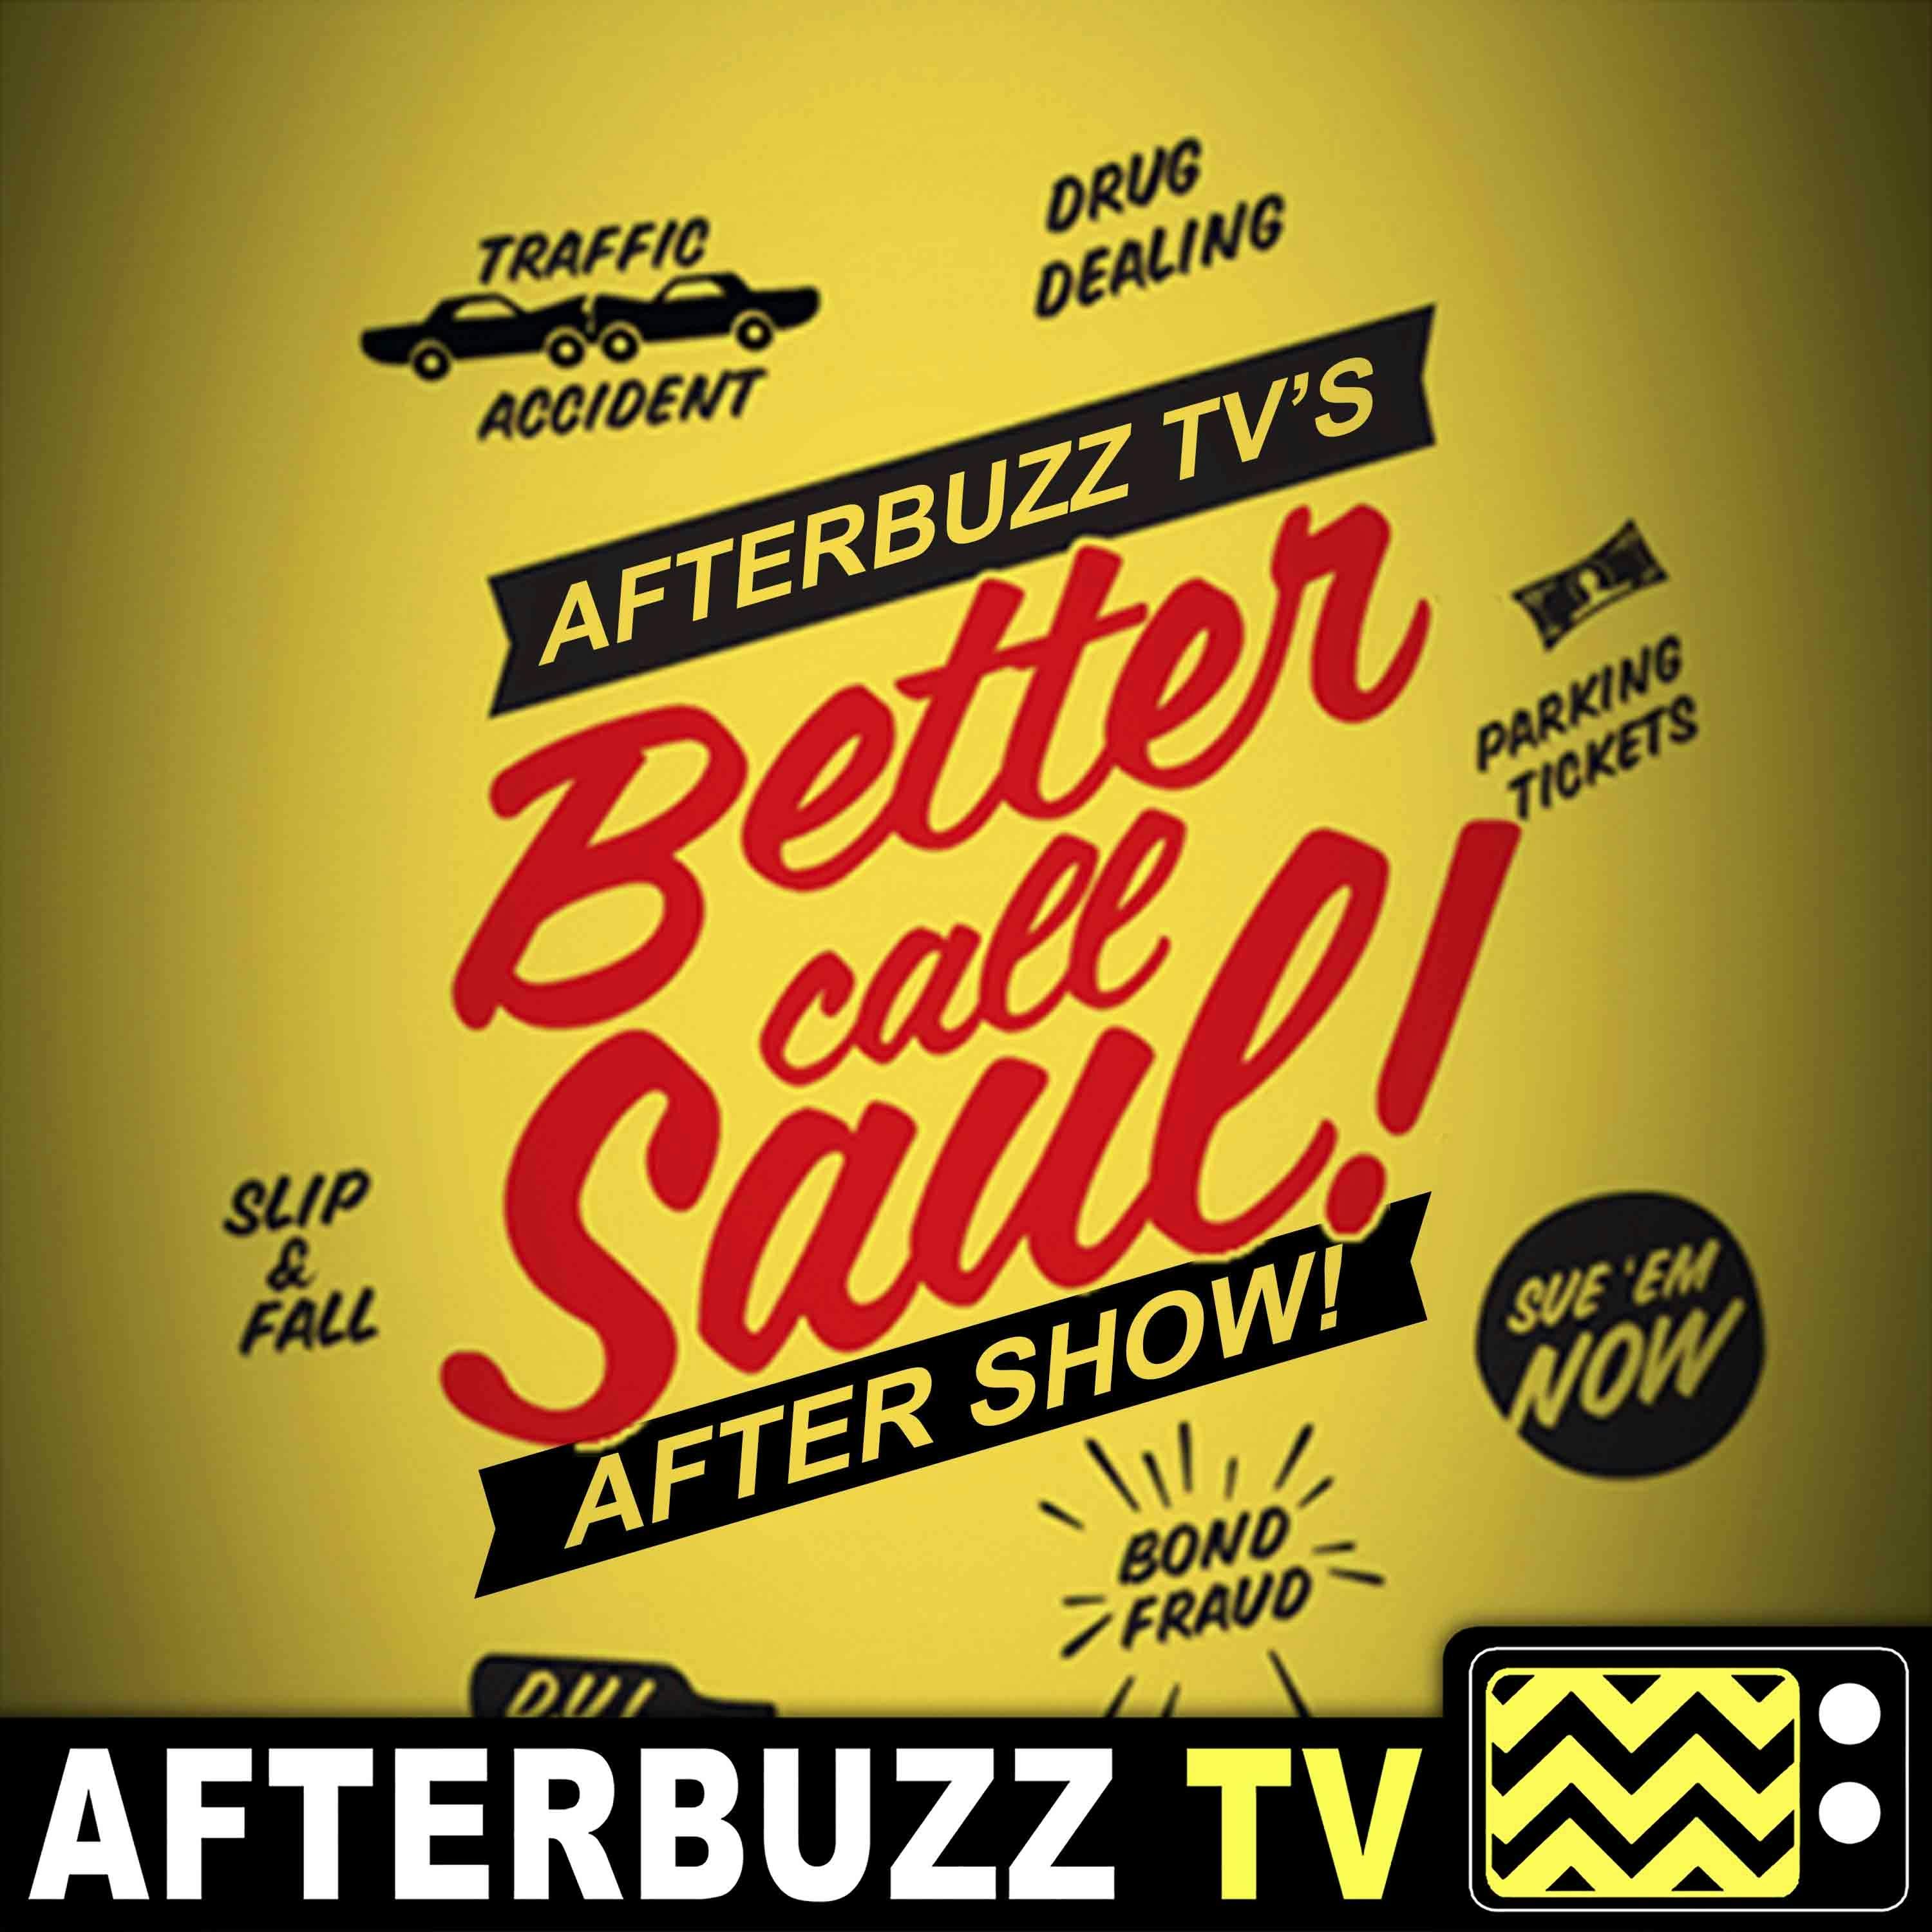 Better Call Saul S:1 | Michael Mando Guests on Pimento E:9 | AfterBuzz TV AfterShow